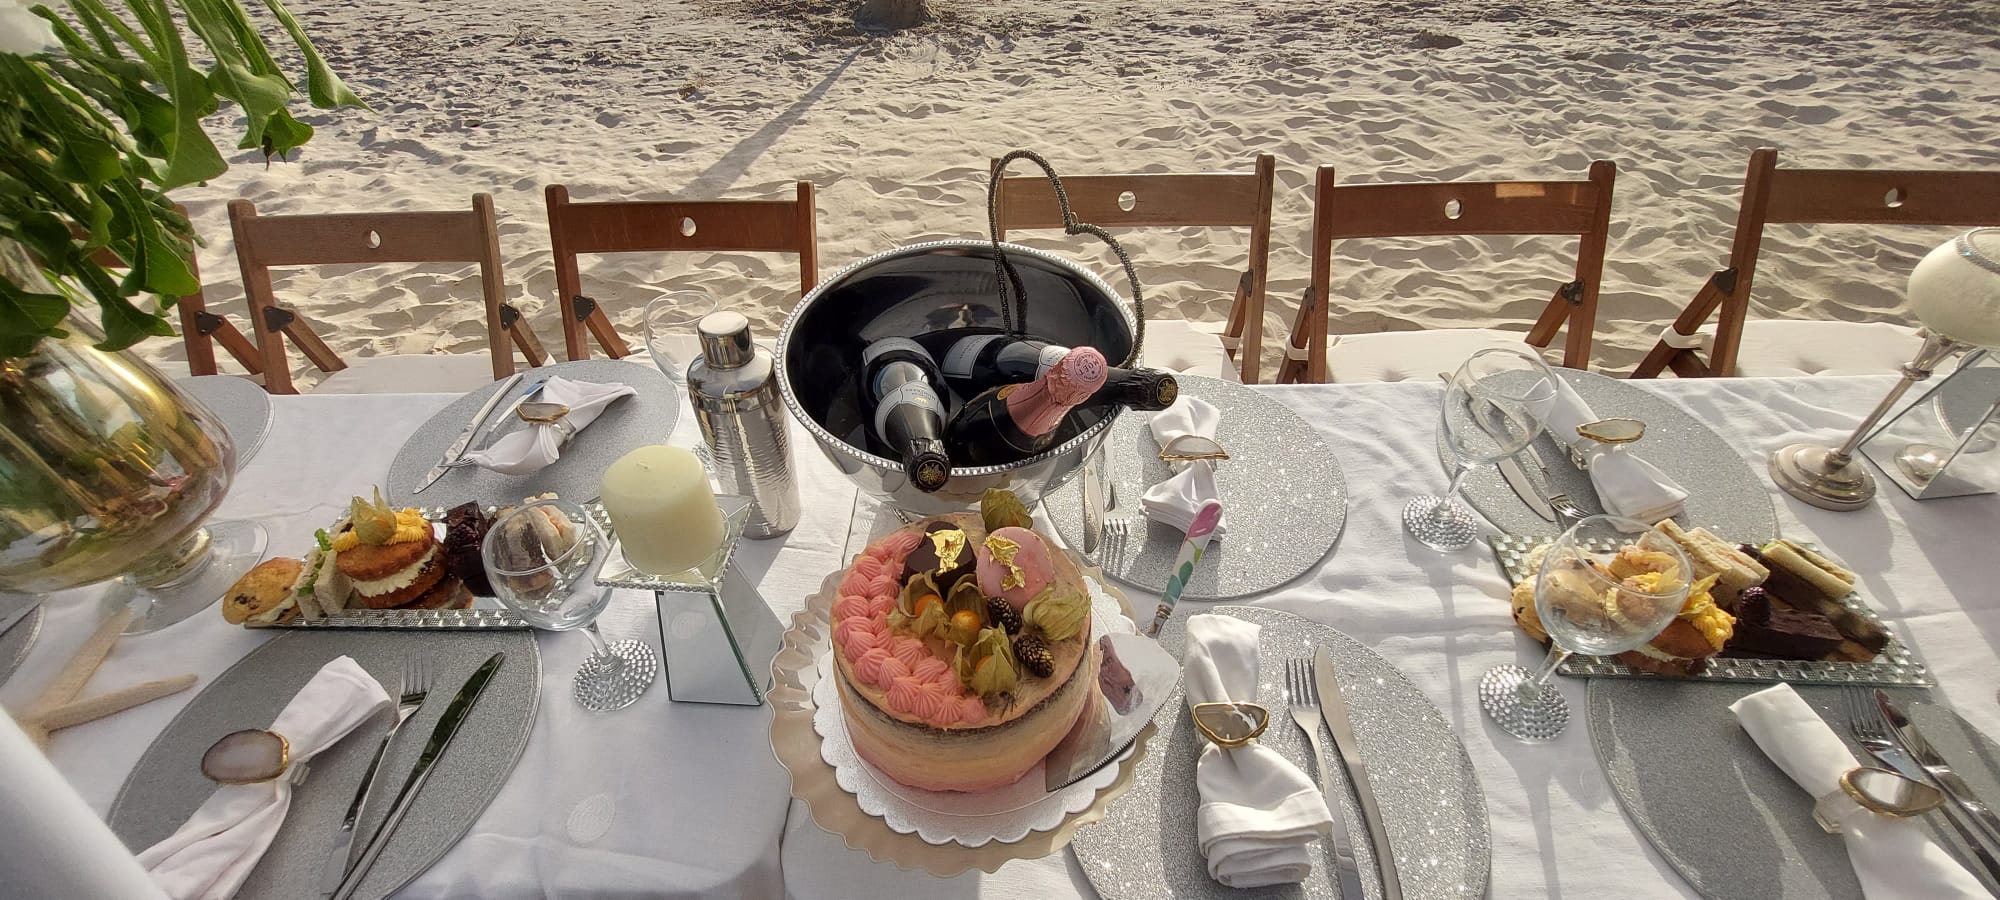 Destination Weddings - Afternoon Tea By The Sea